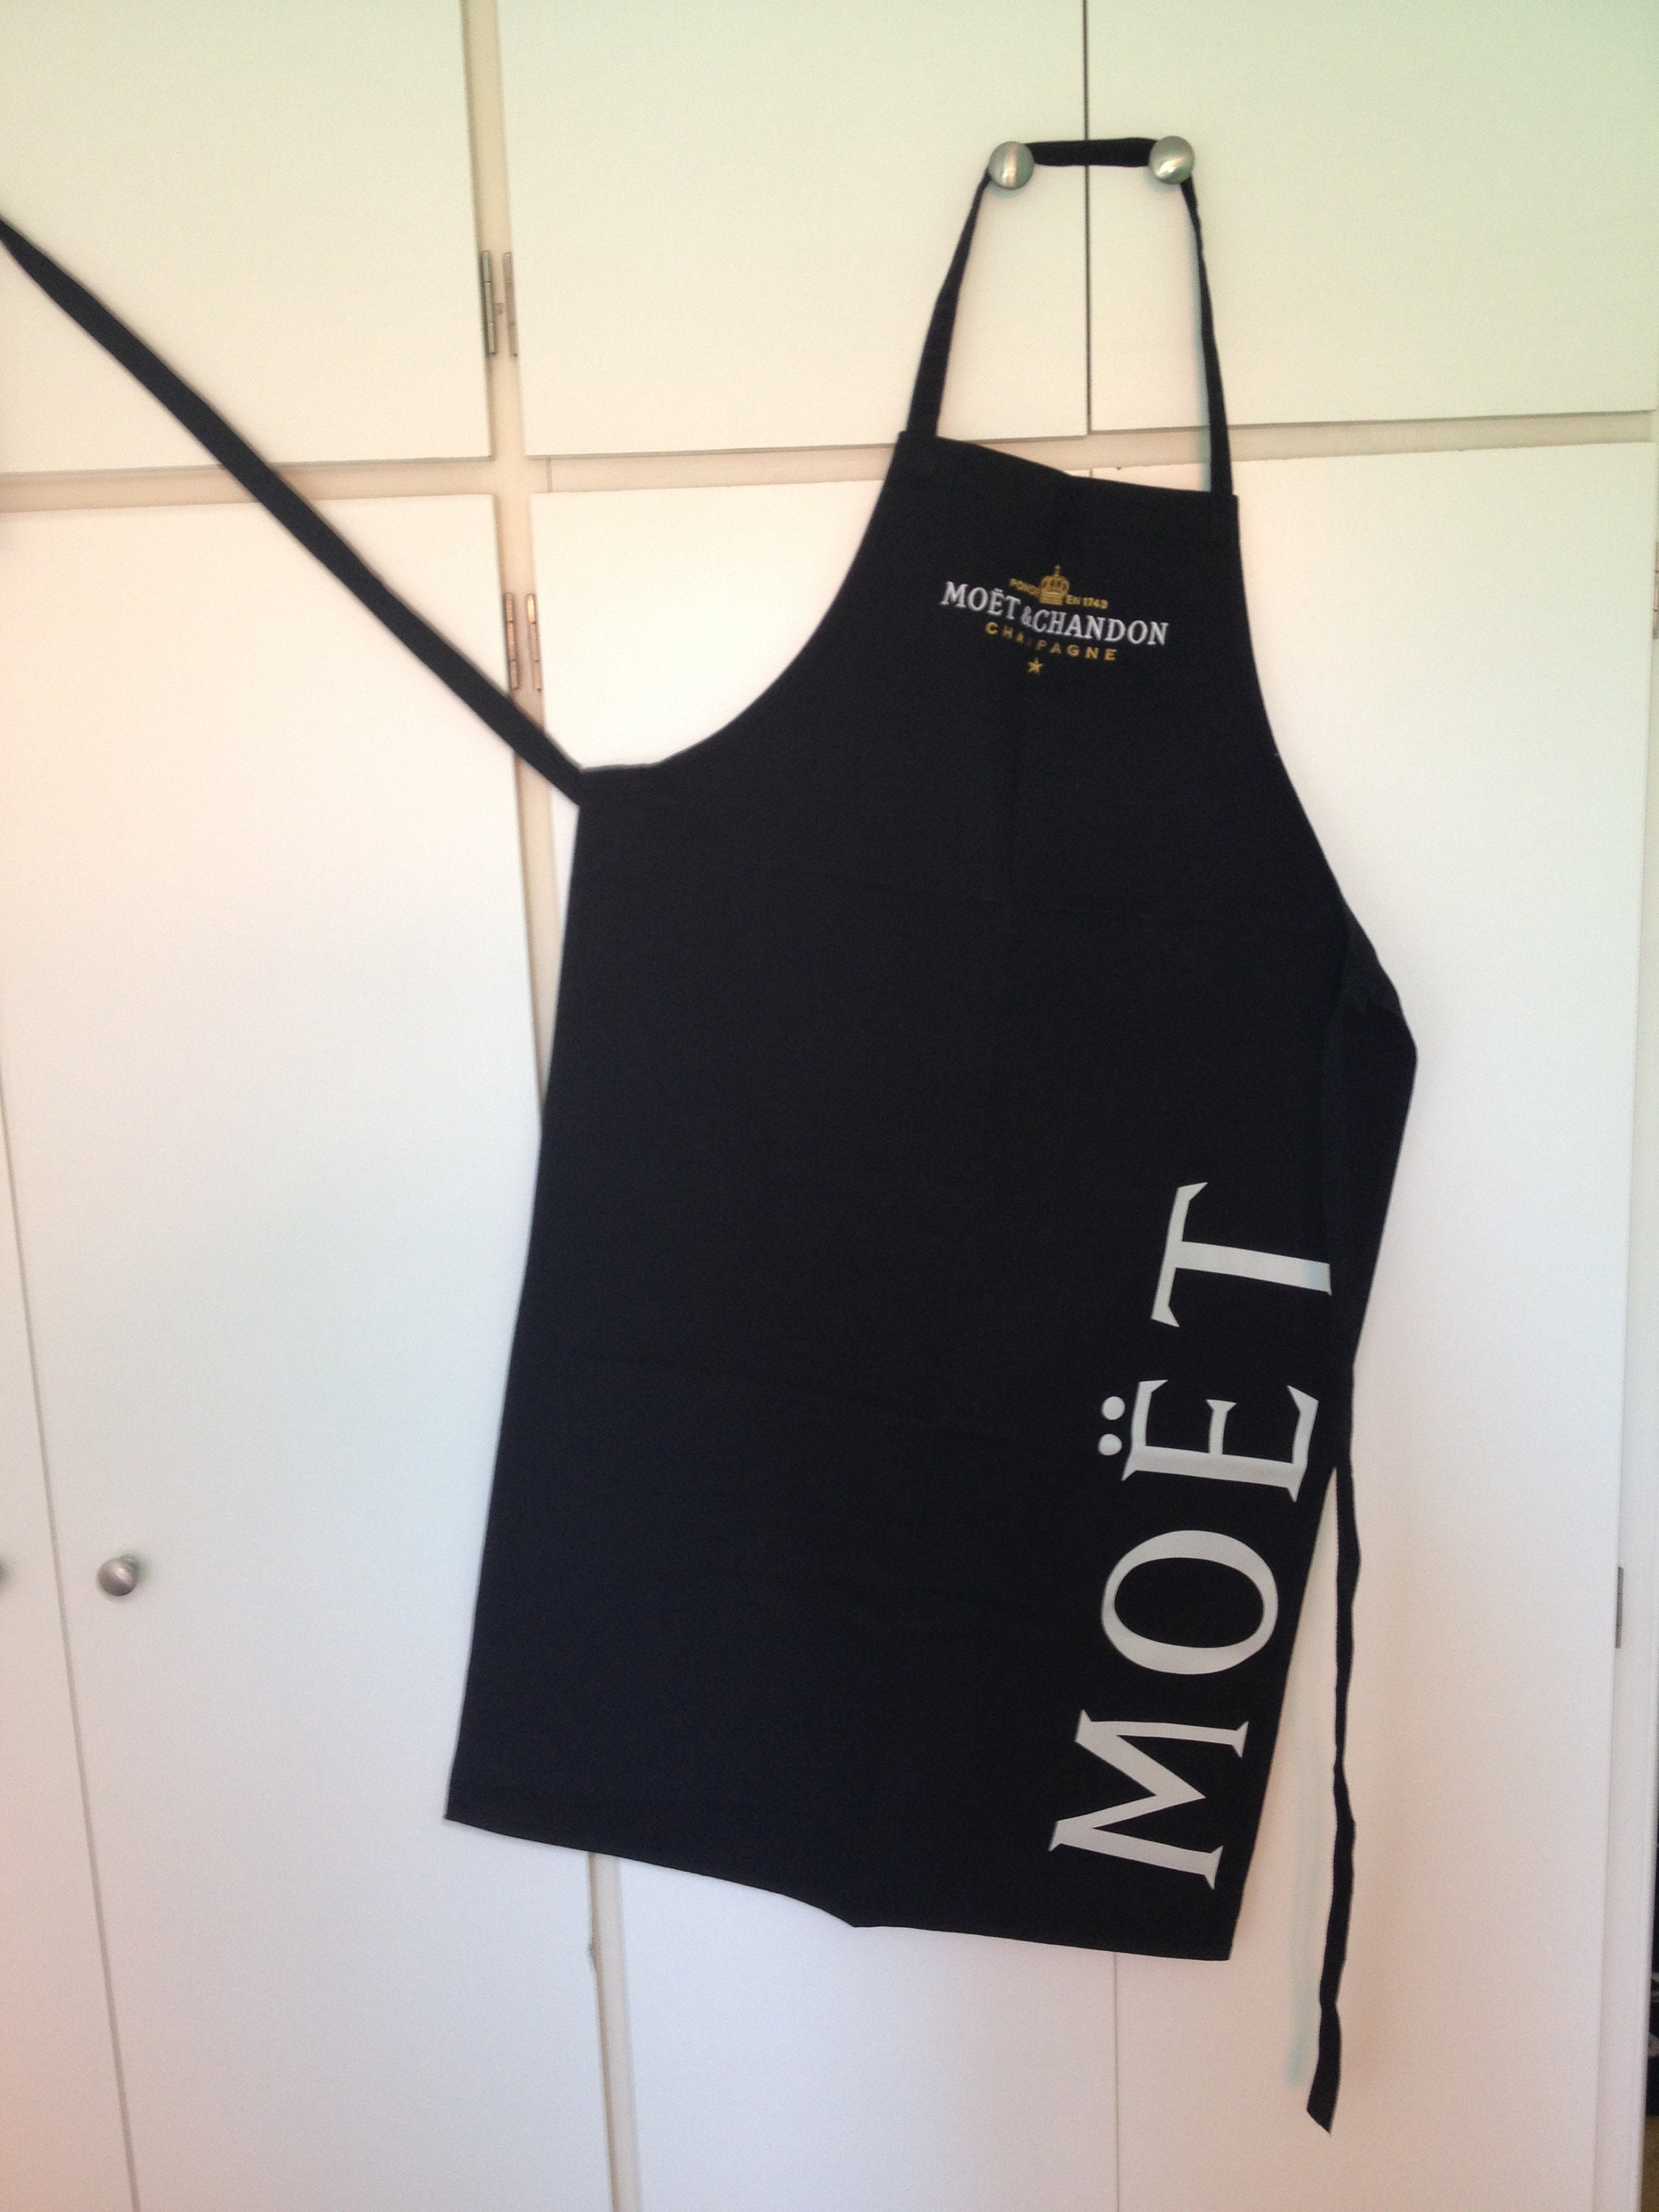 MOET CHANDON CHAMPAGNE Apron Full Length With Bib Brand New in 